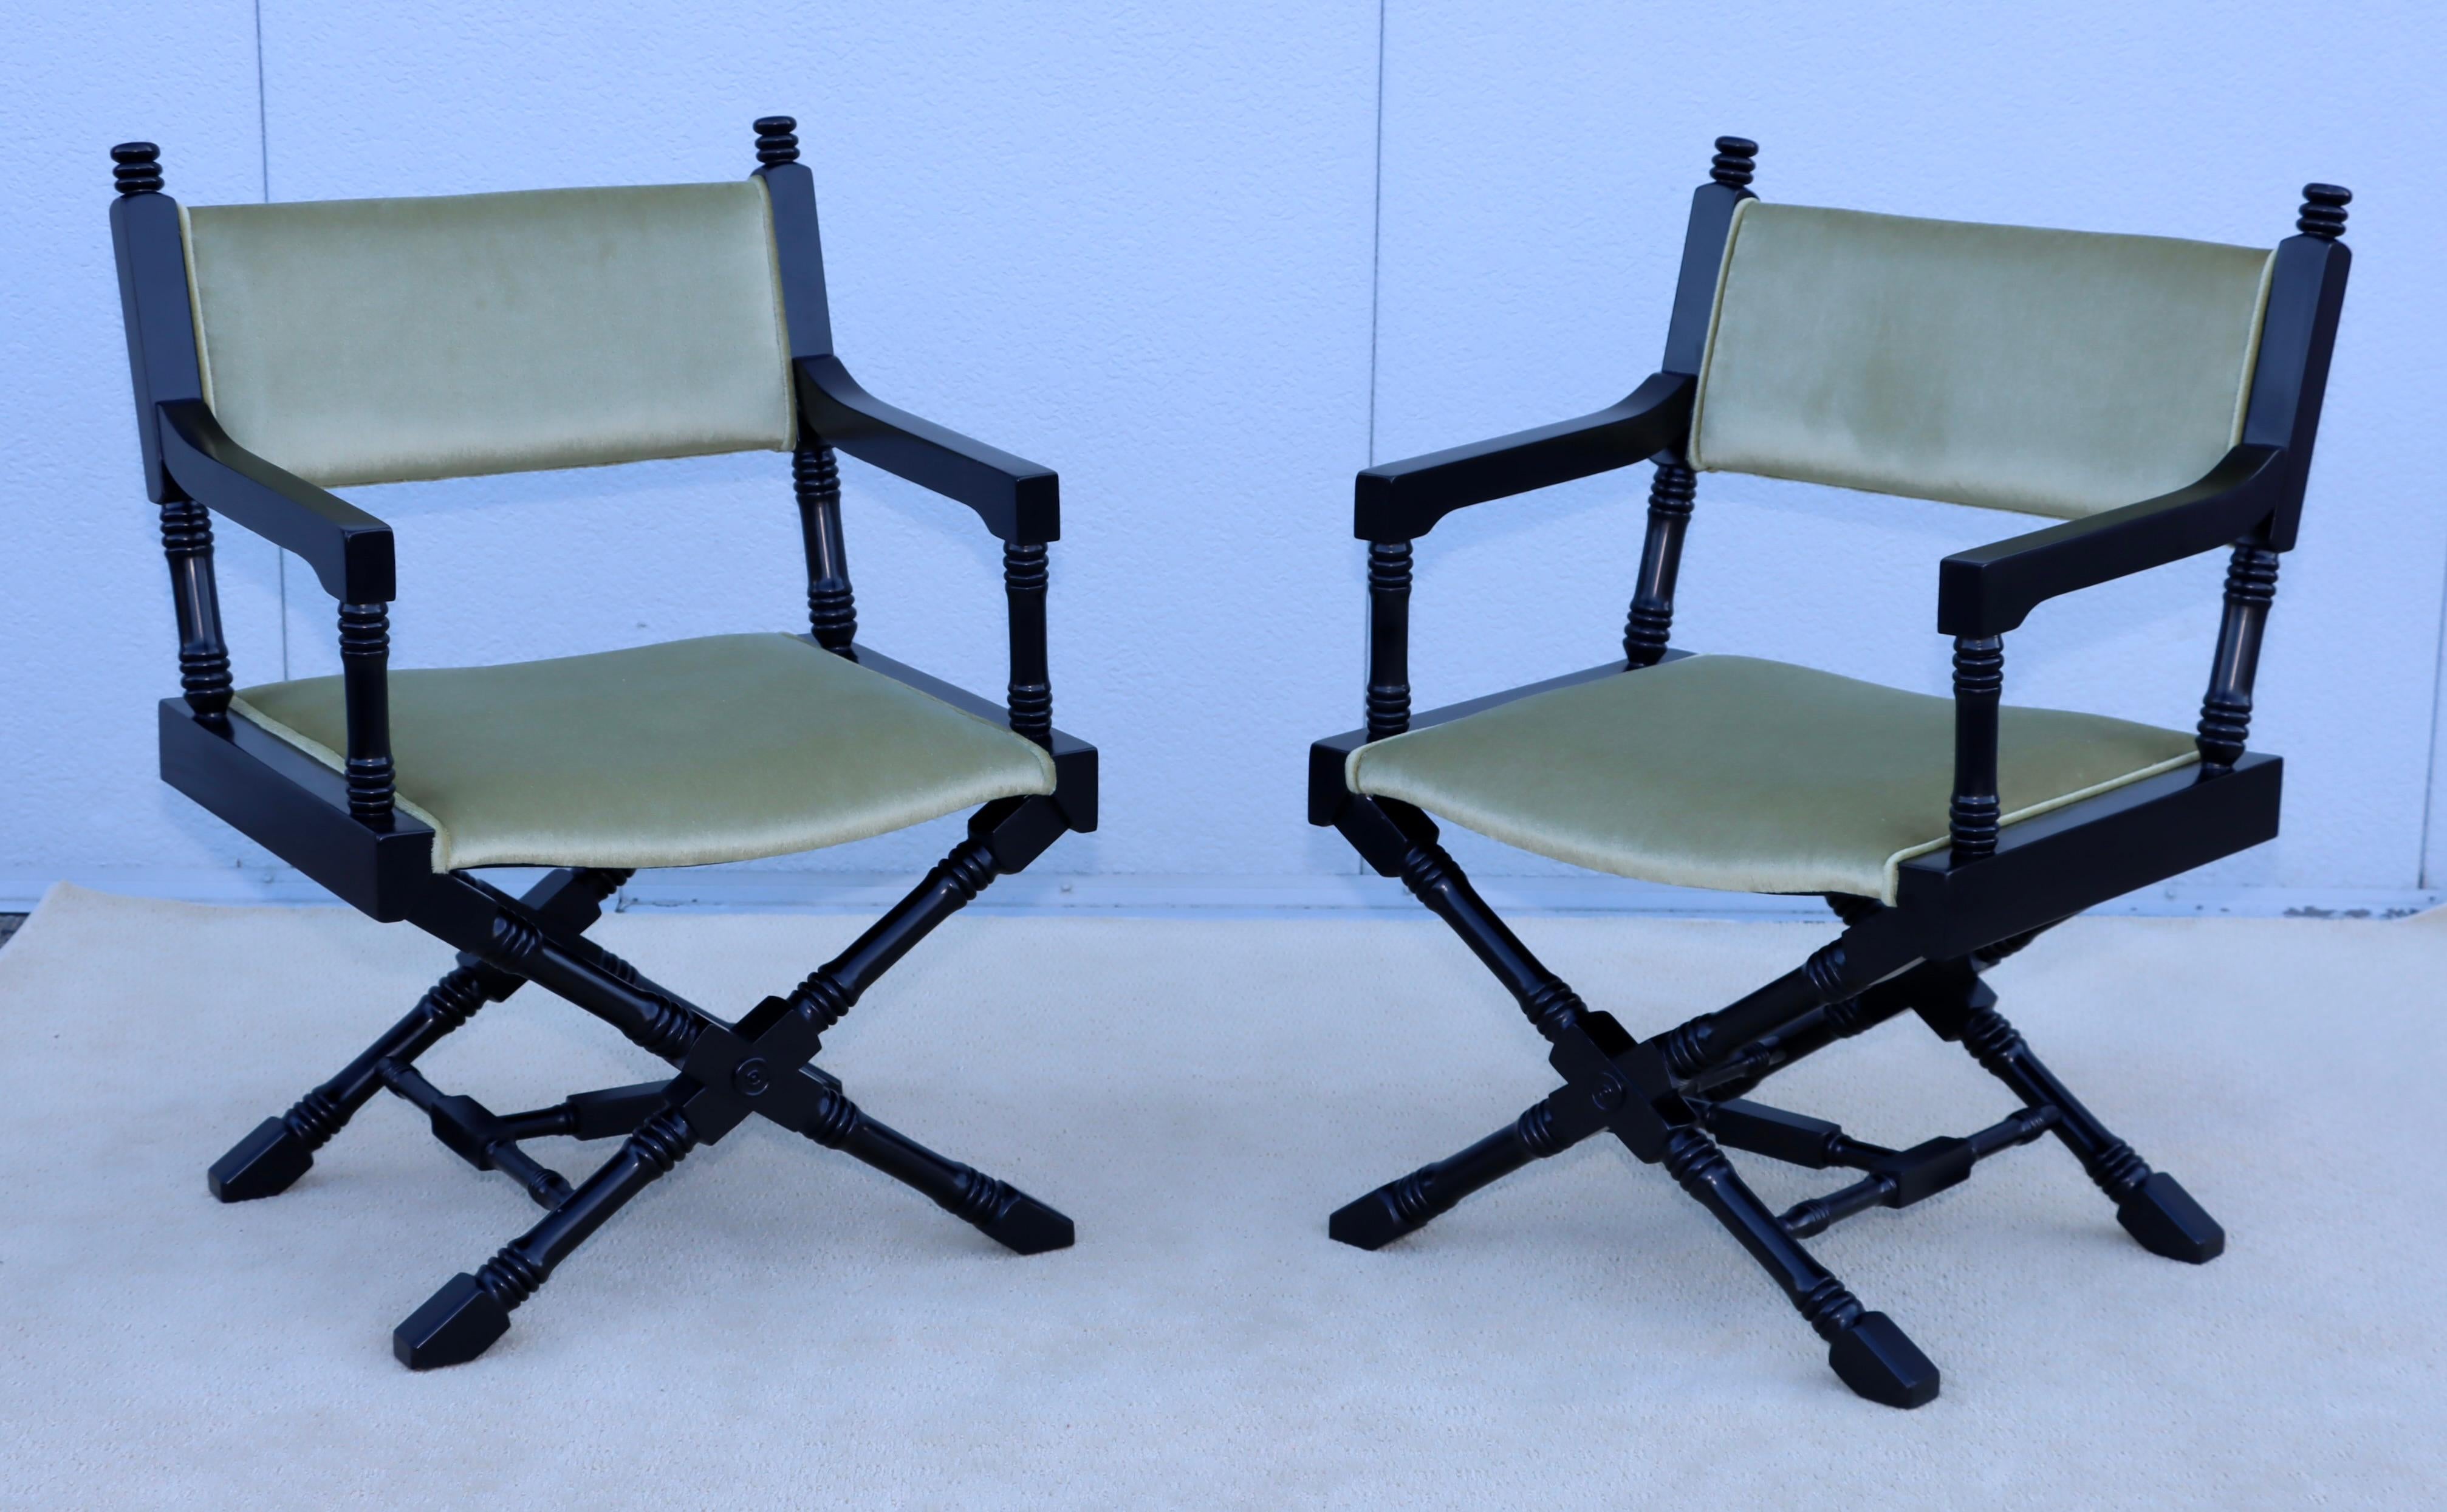 1960's Hollywood regency style director chairs newly reupholstered in mohair fabric and newly lacquered in black, with minor wear and patina due to age and use.